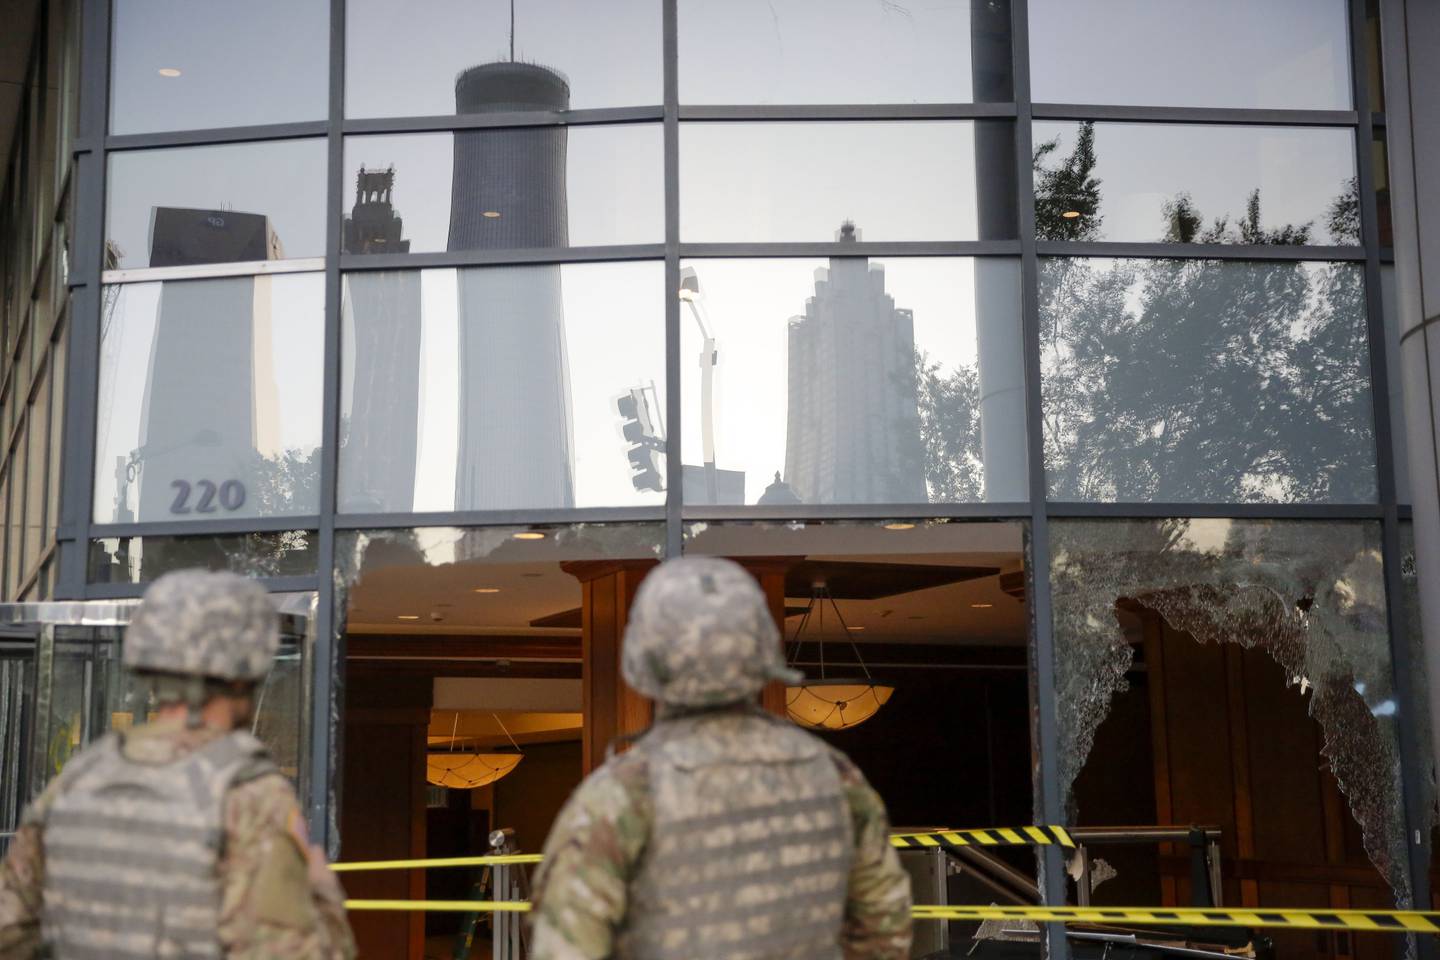 The National Guard looks at the damage done to downtown Atlanta in the aftermath of a demonstration against police violence on Saturday, May 30, 2020, in Atlanta.